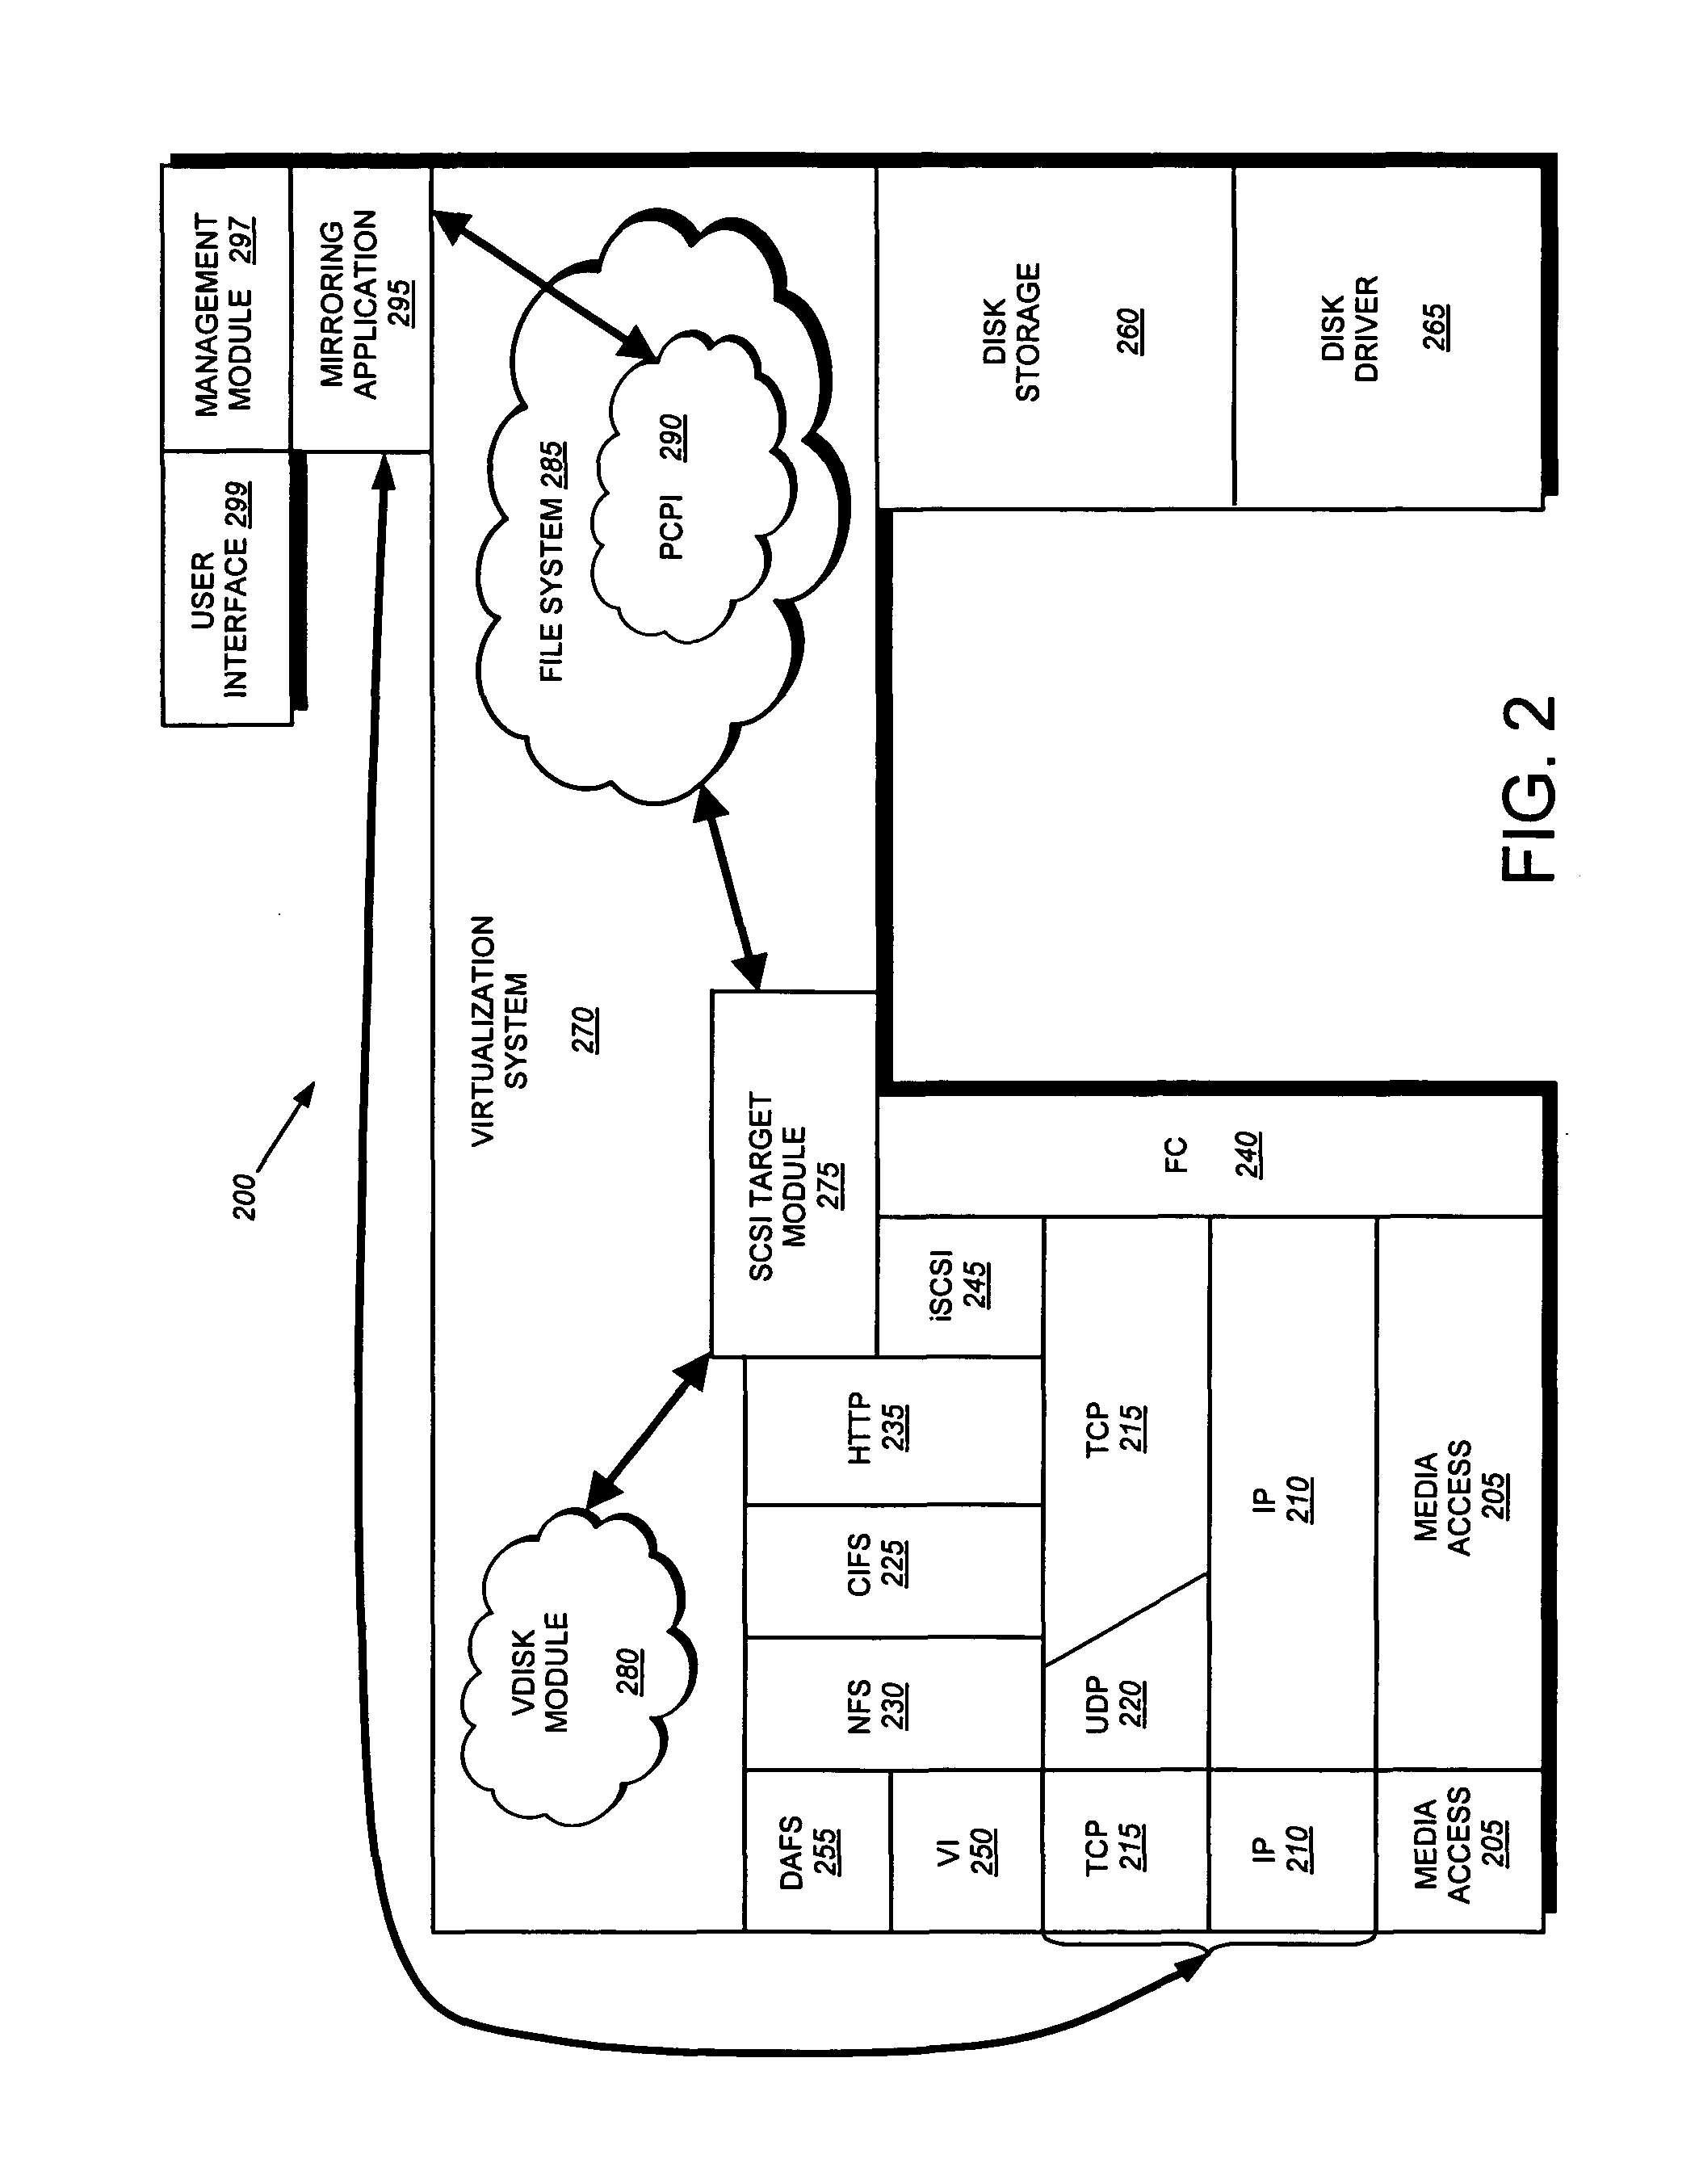 System and method for automatic scheduling and policy provisioning for information lifecycle management